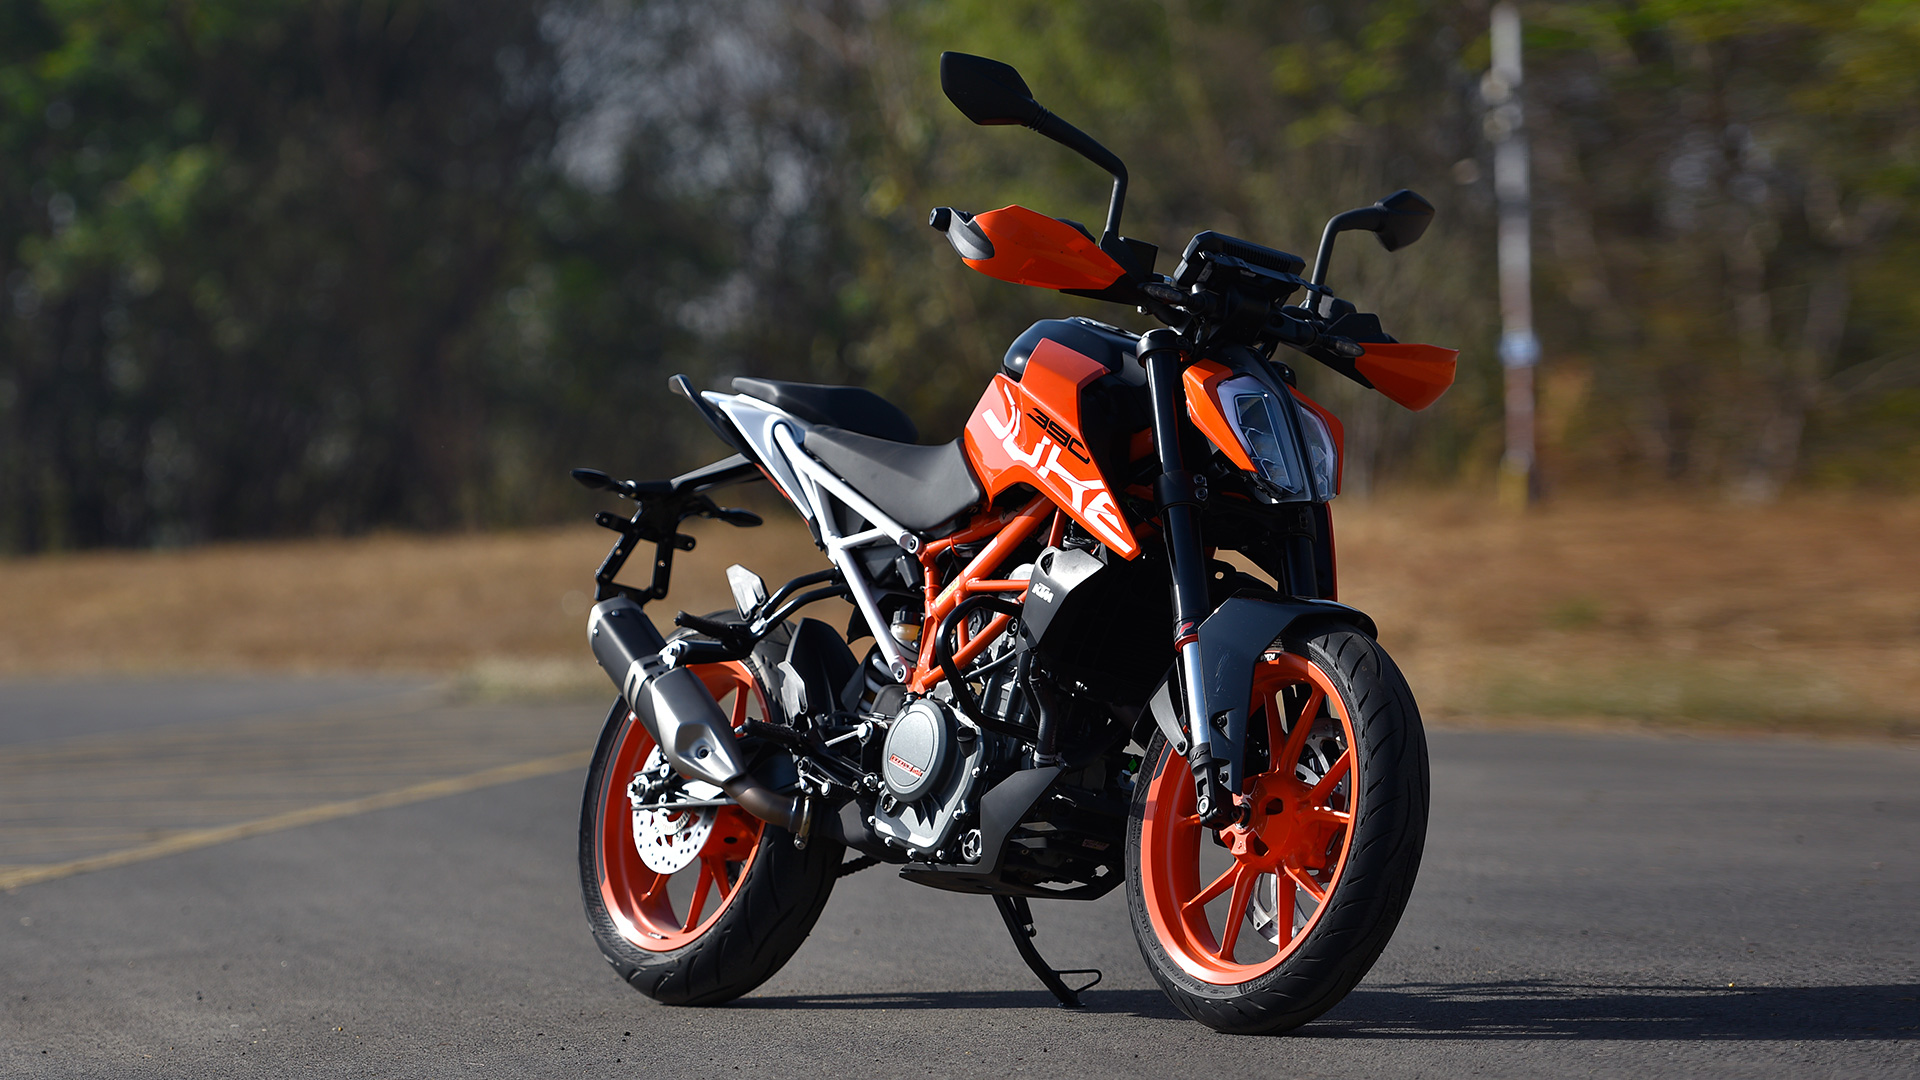 KTM 390 Duke 2017 - Price, Mileage, Reviews, Specification, Gallery